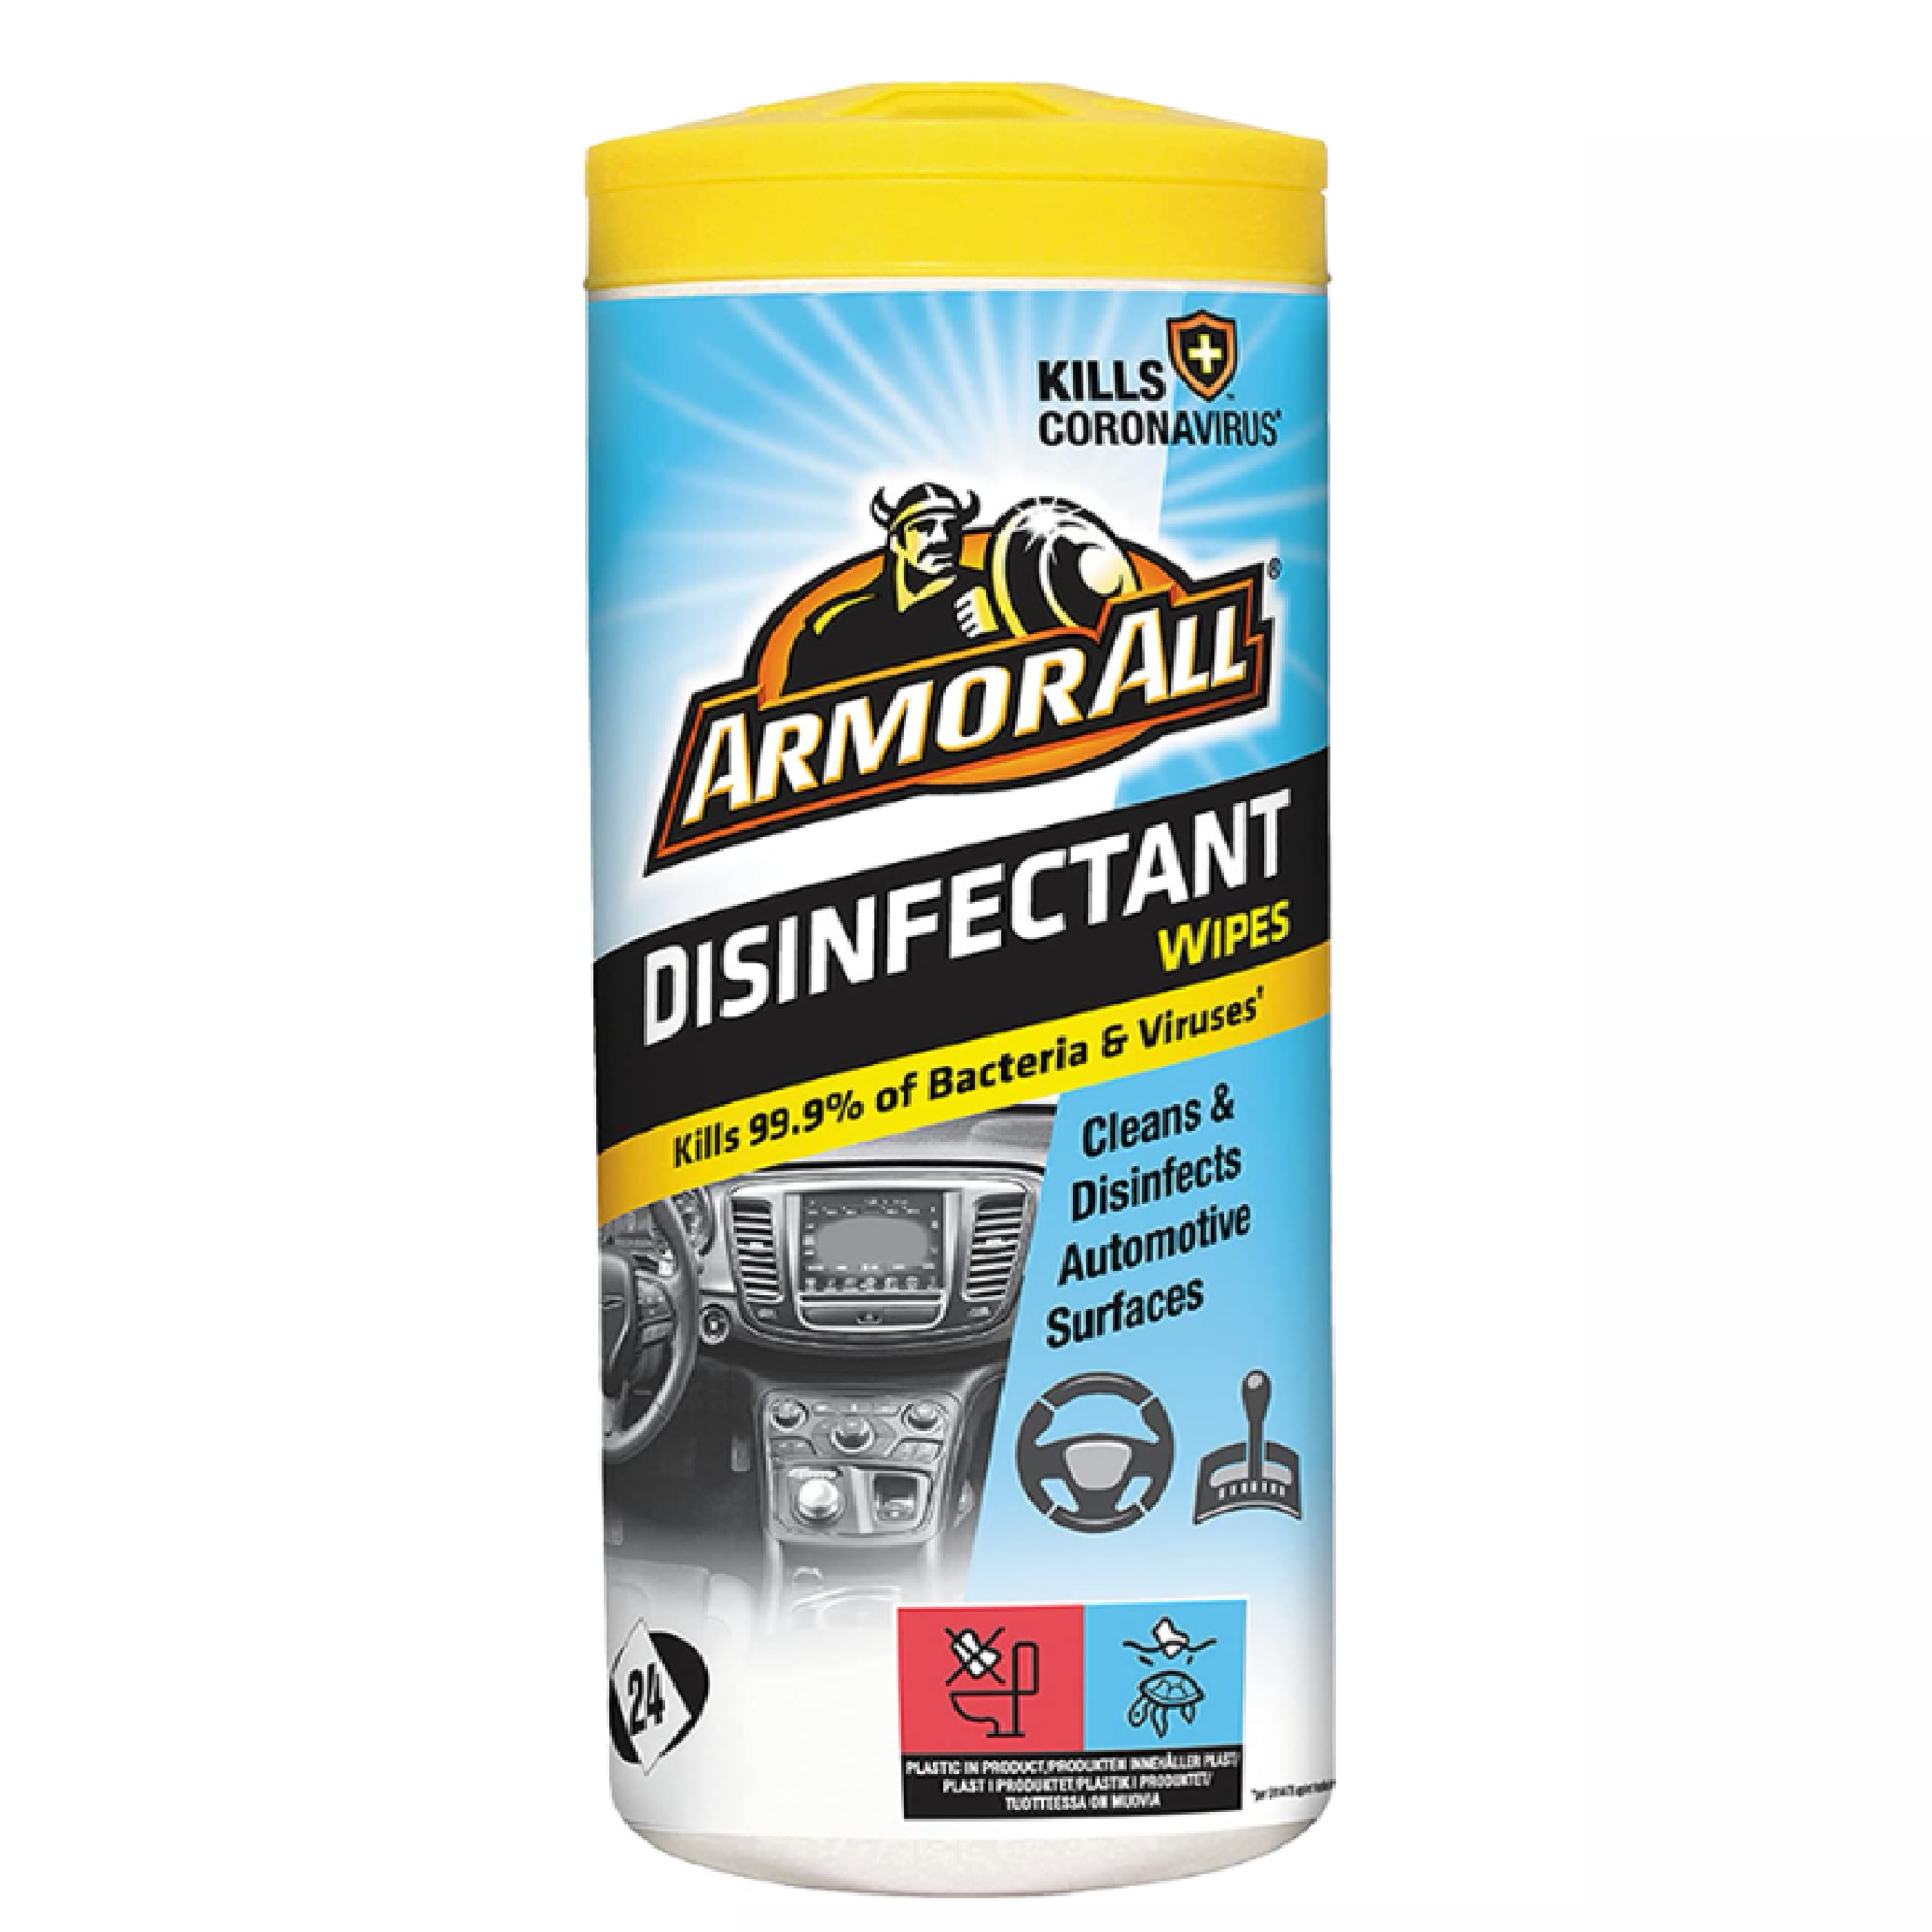 Armor All DISINFECTANT Wipes 24PC/Tub A15387